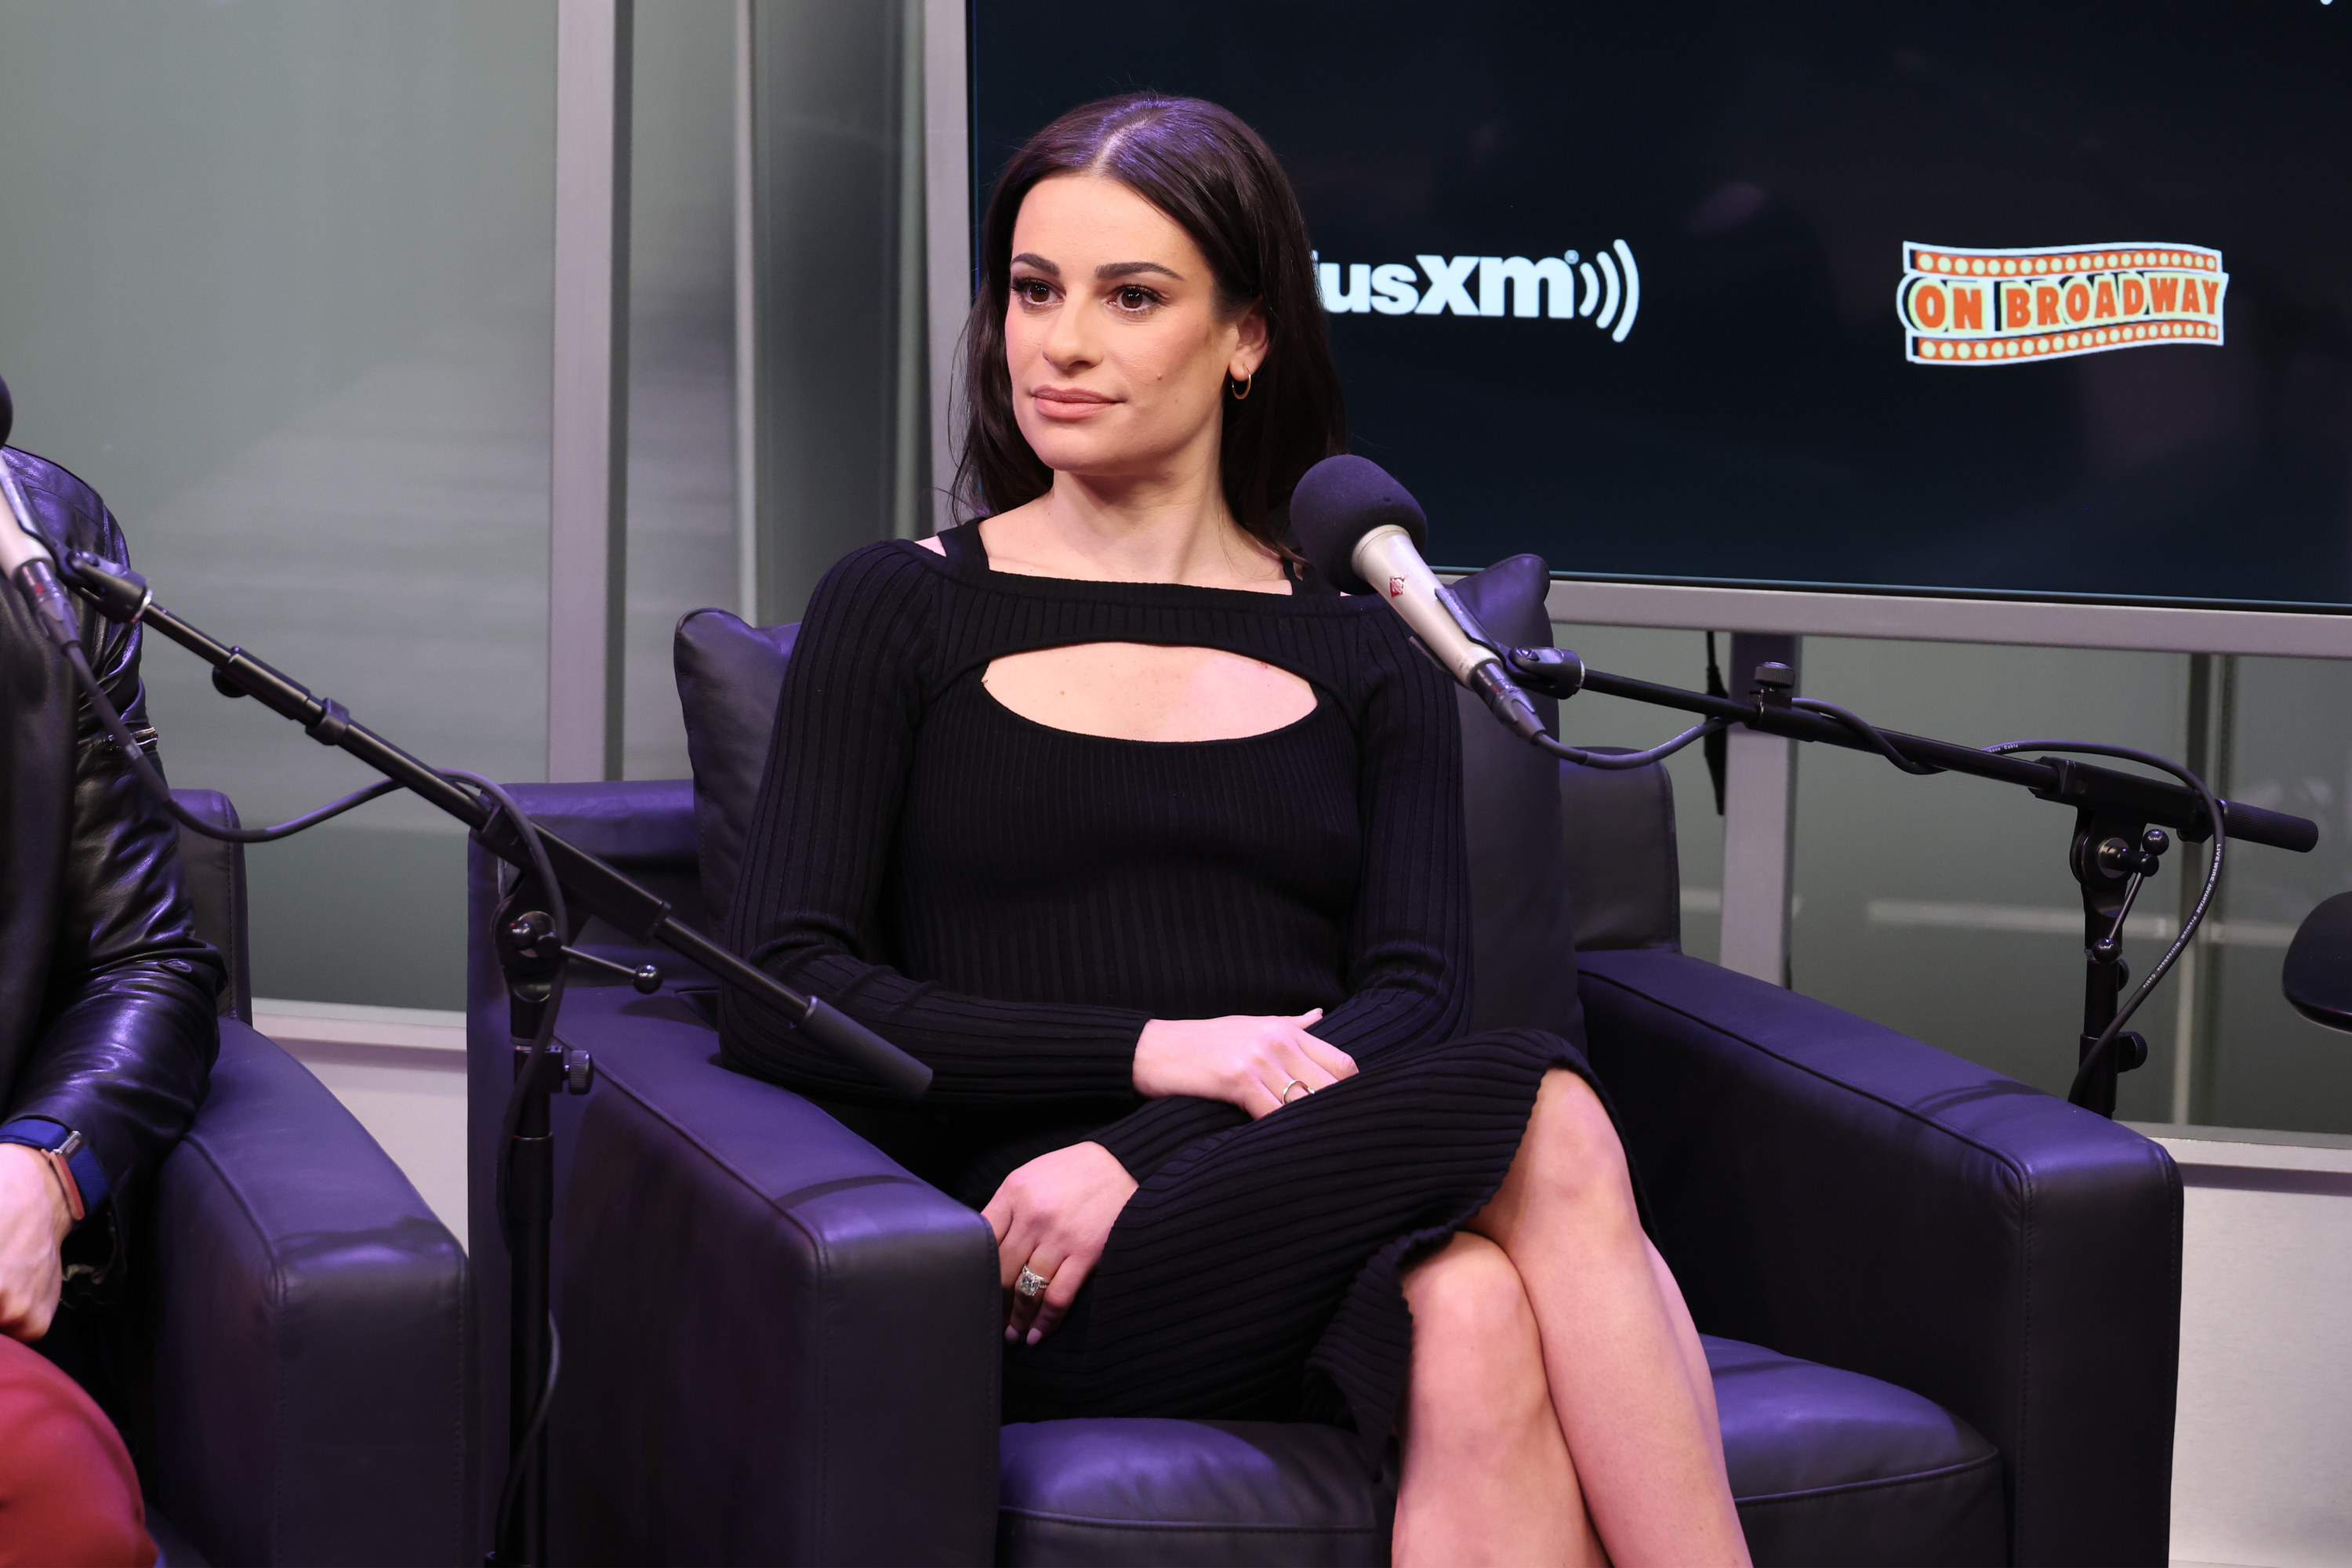 Lea looks to the side as she sits during a podcast interview